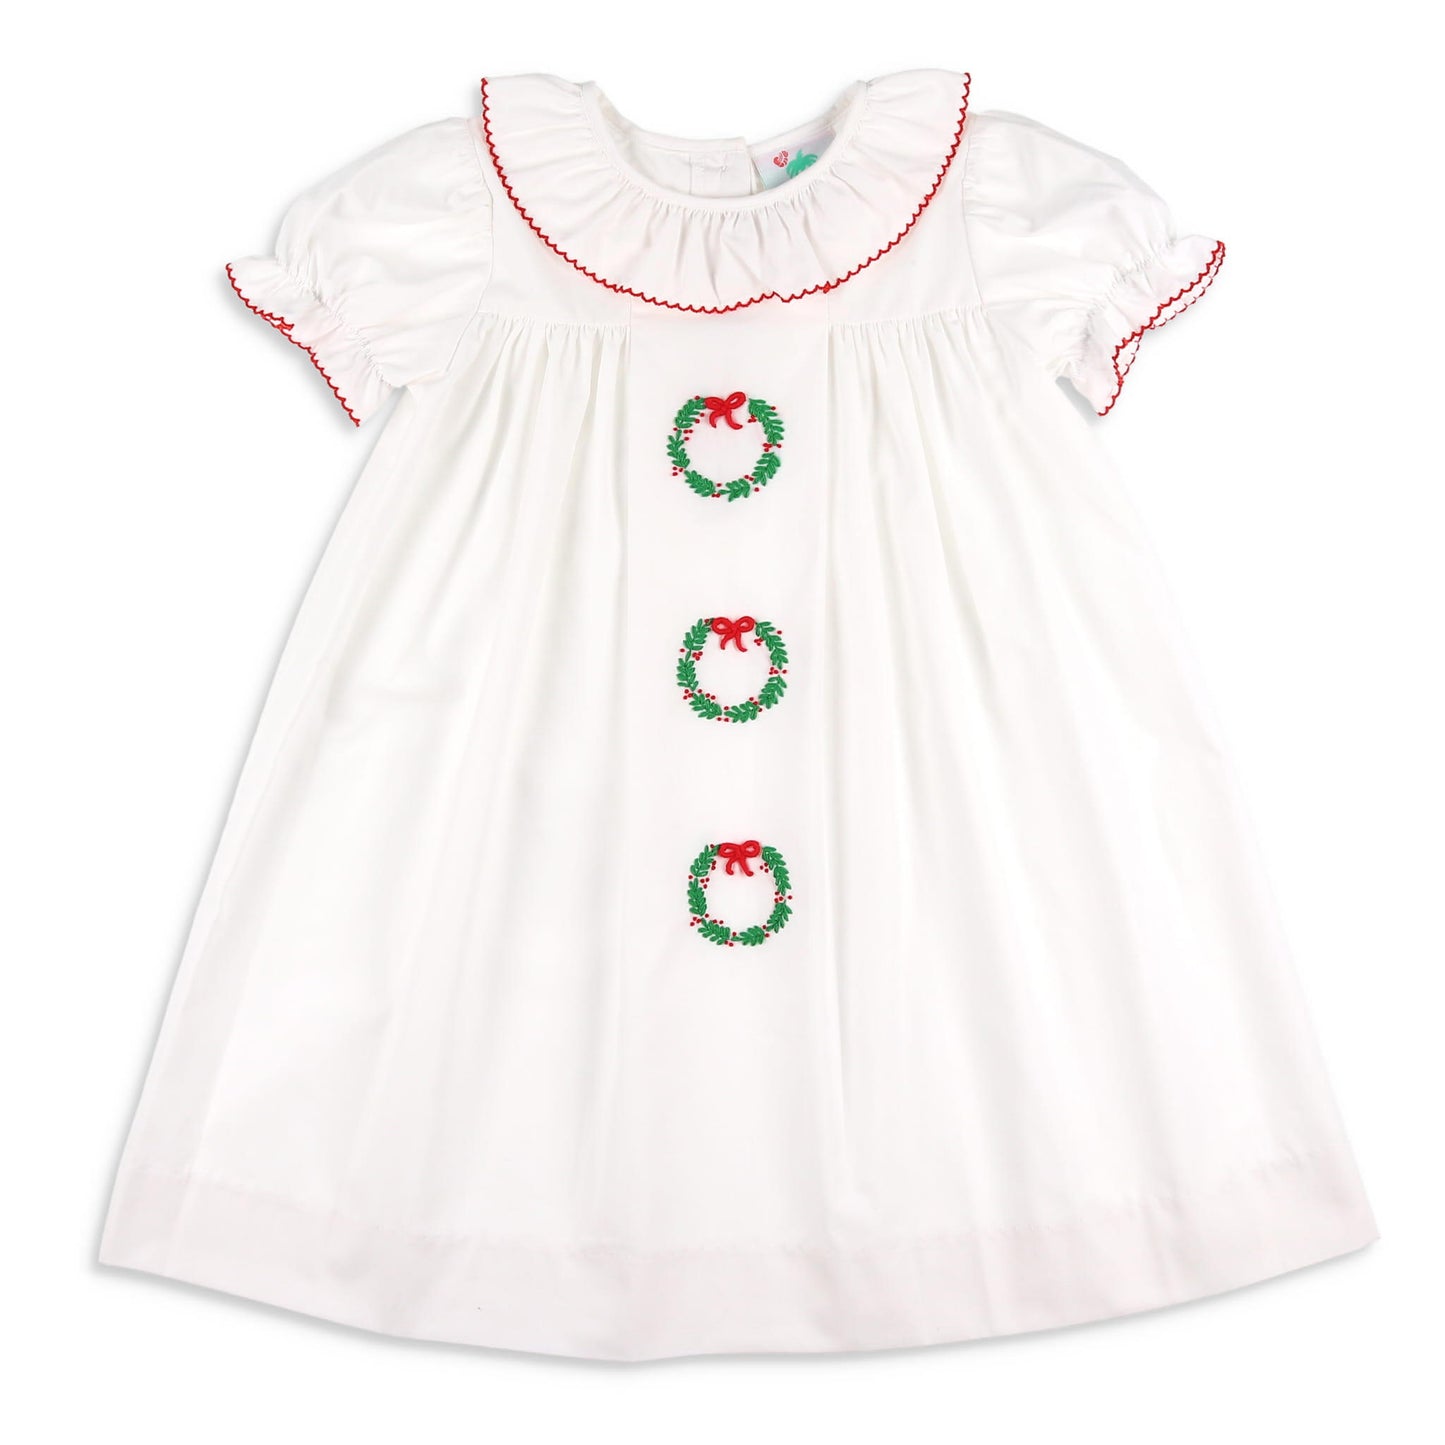 Emery Embroidered Wreath Dress